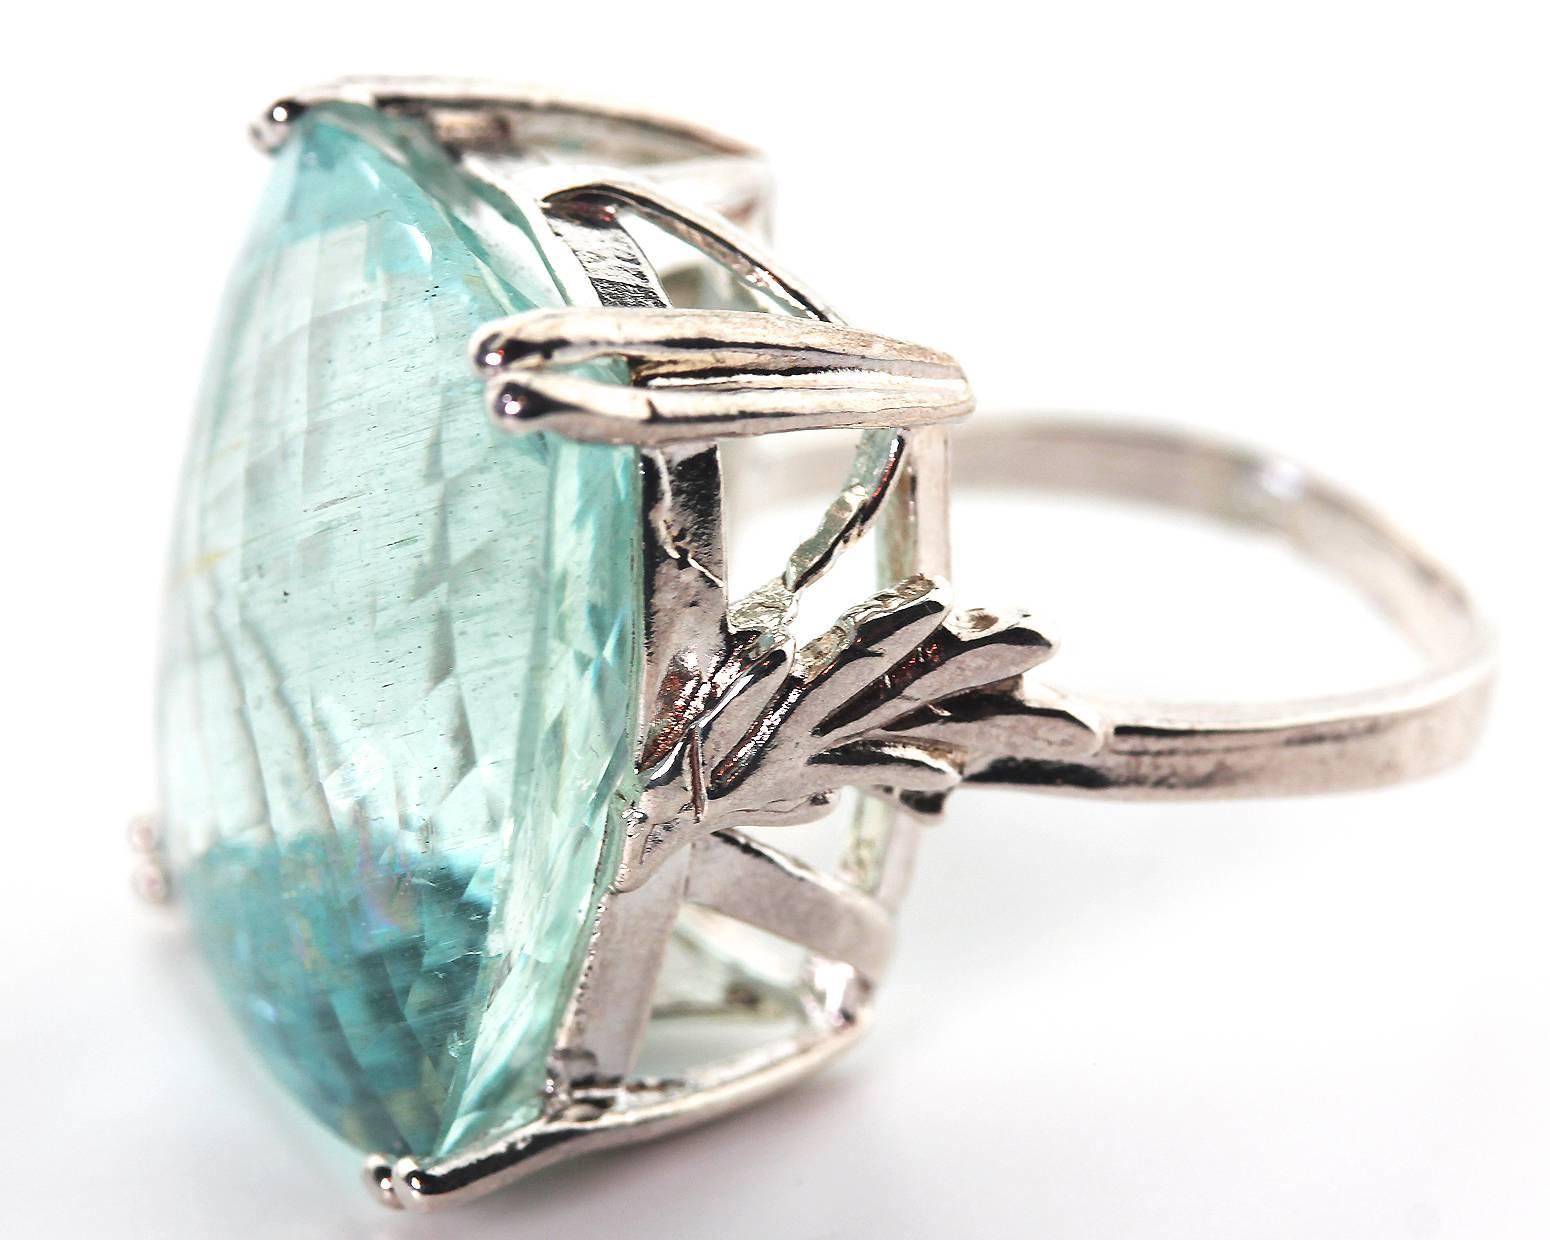 28.5 Carats of magnificent translucent sparkling checkerboard cut natural Aquamarine ring.  The photograph reflects some of the light from the camera.  This does not have a dark mark
Size:  20.7 mm xx 19 mm
Ring:  Sterling Silver
Ring size:  5.75